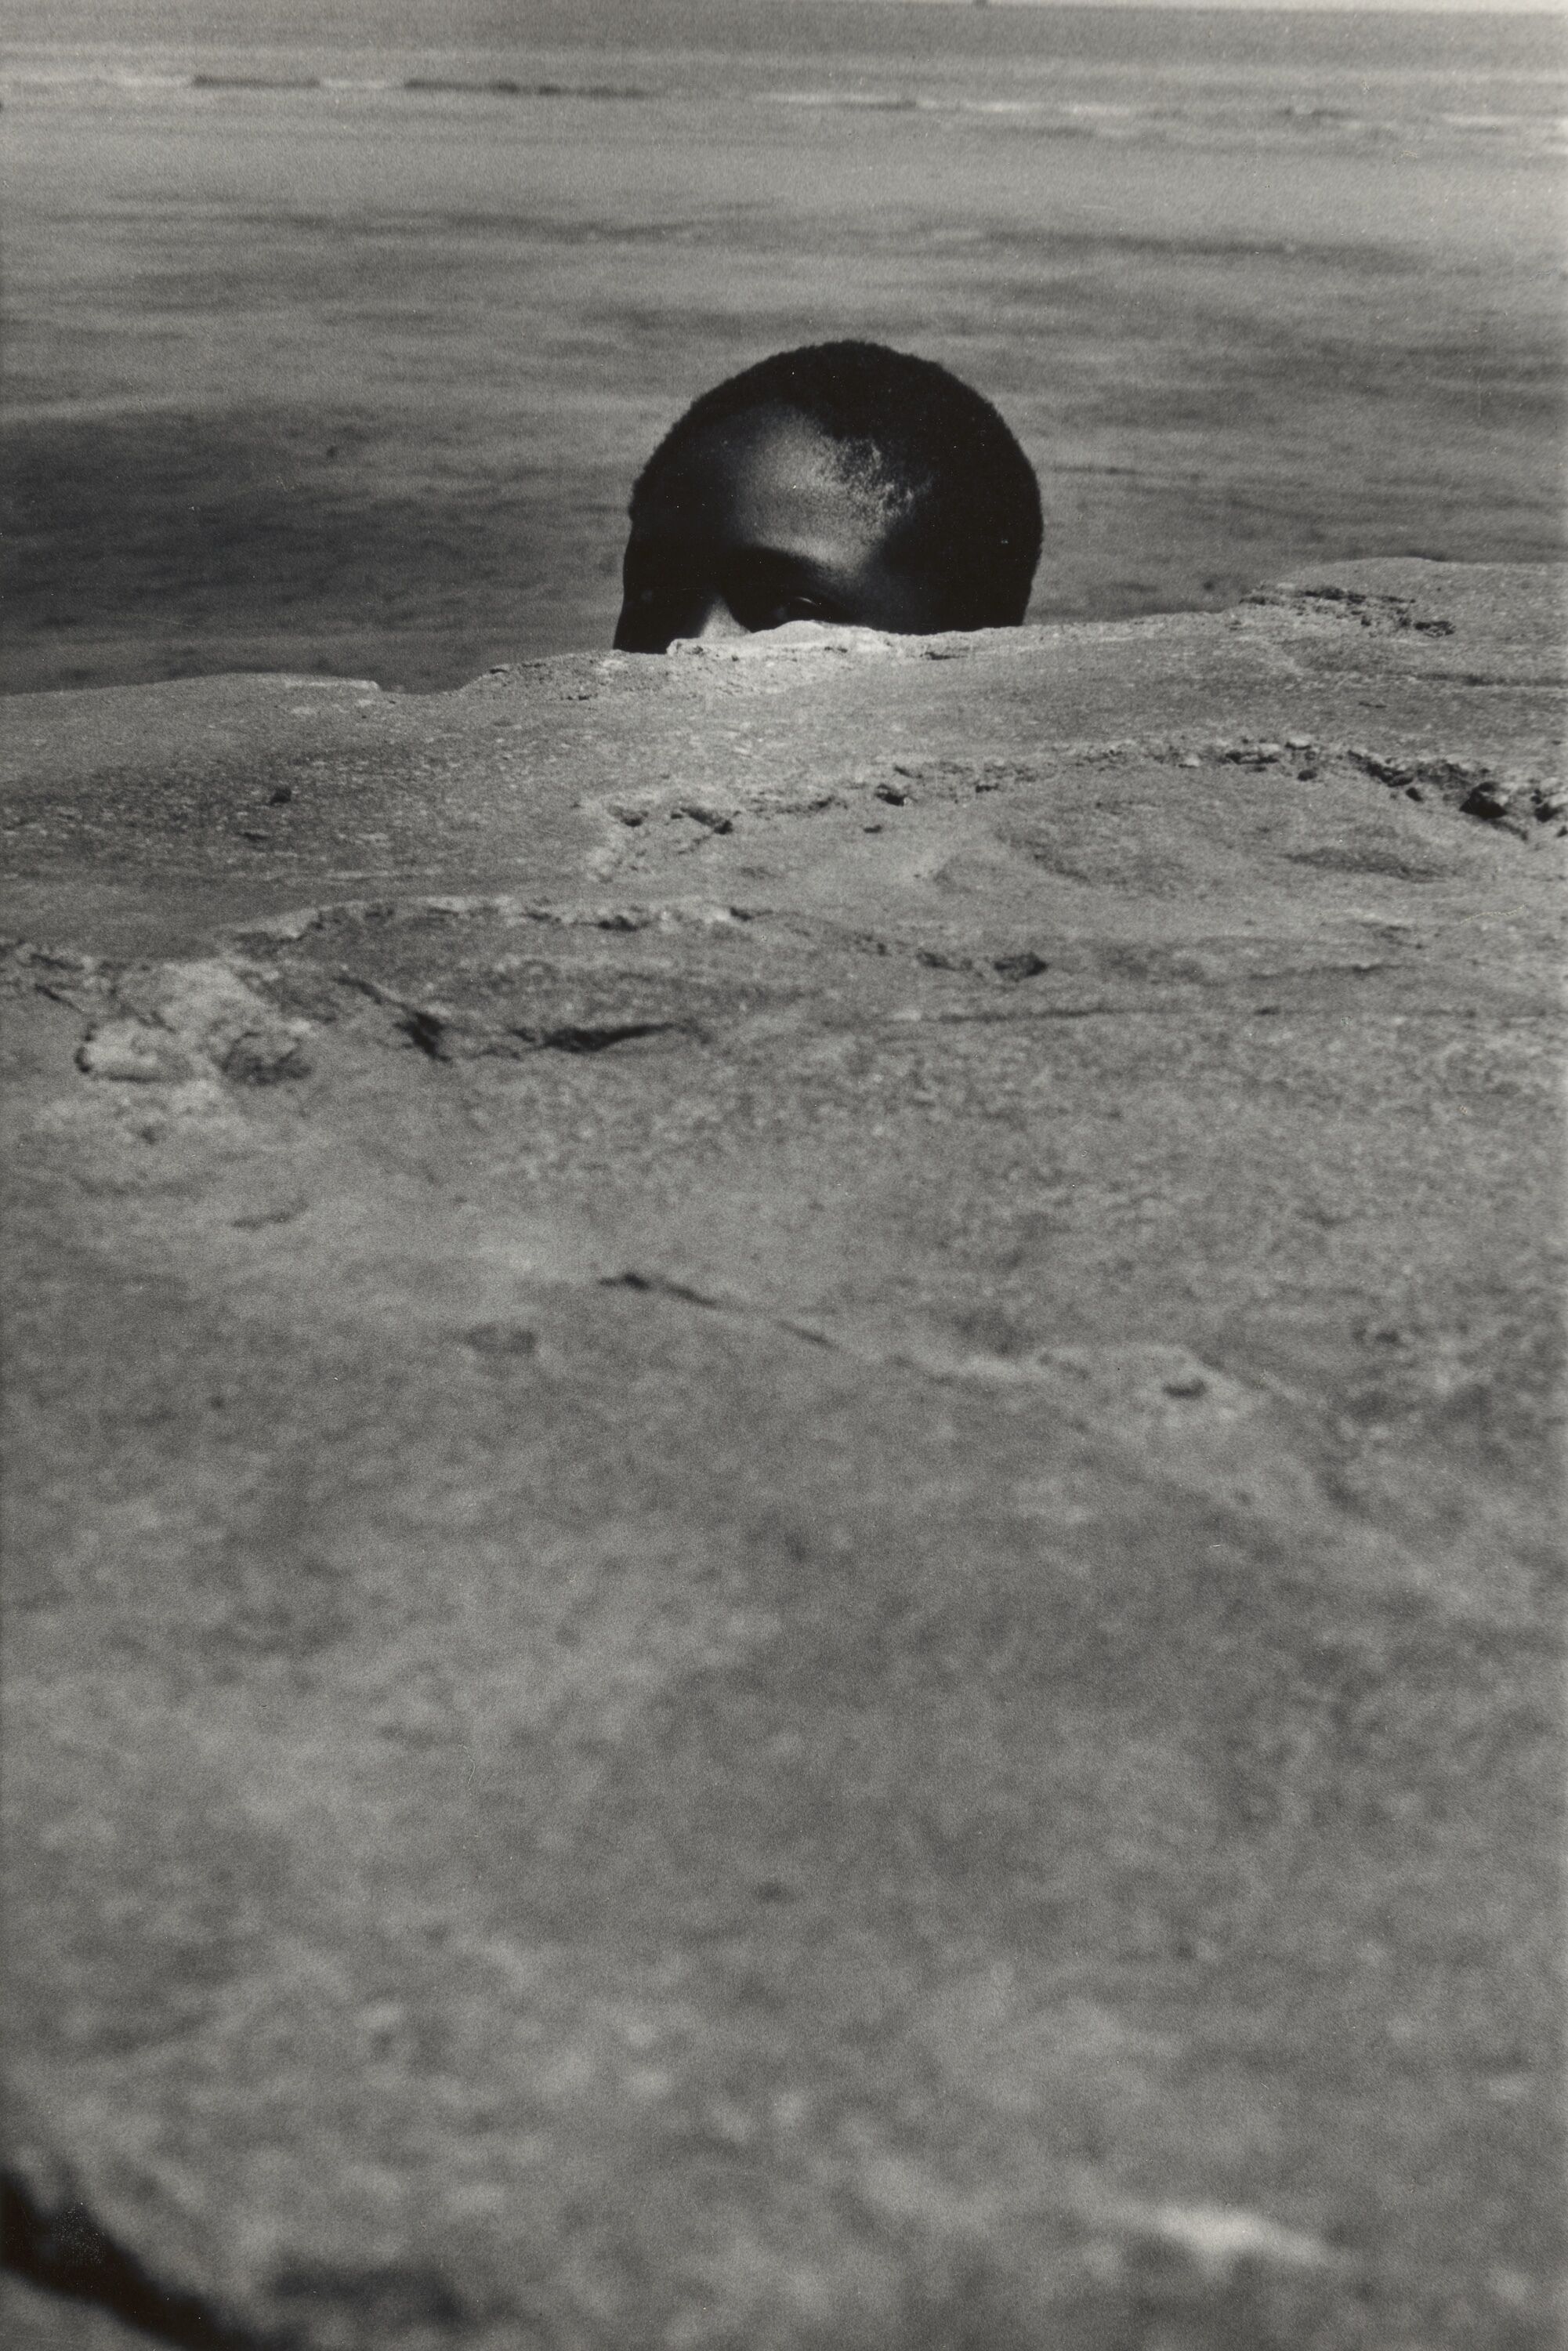 A child mostly hidden behind a rock formation. Only the top of their head is exposed above the rock plateau. 